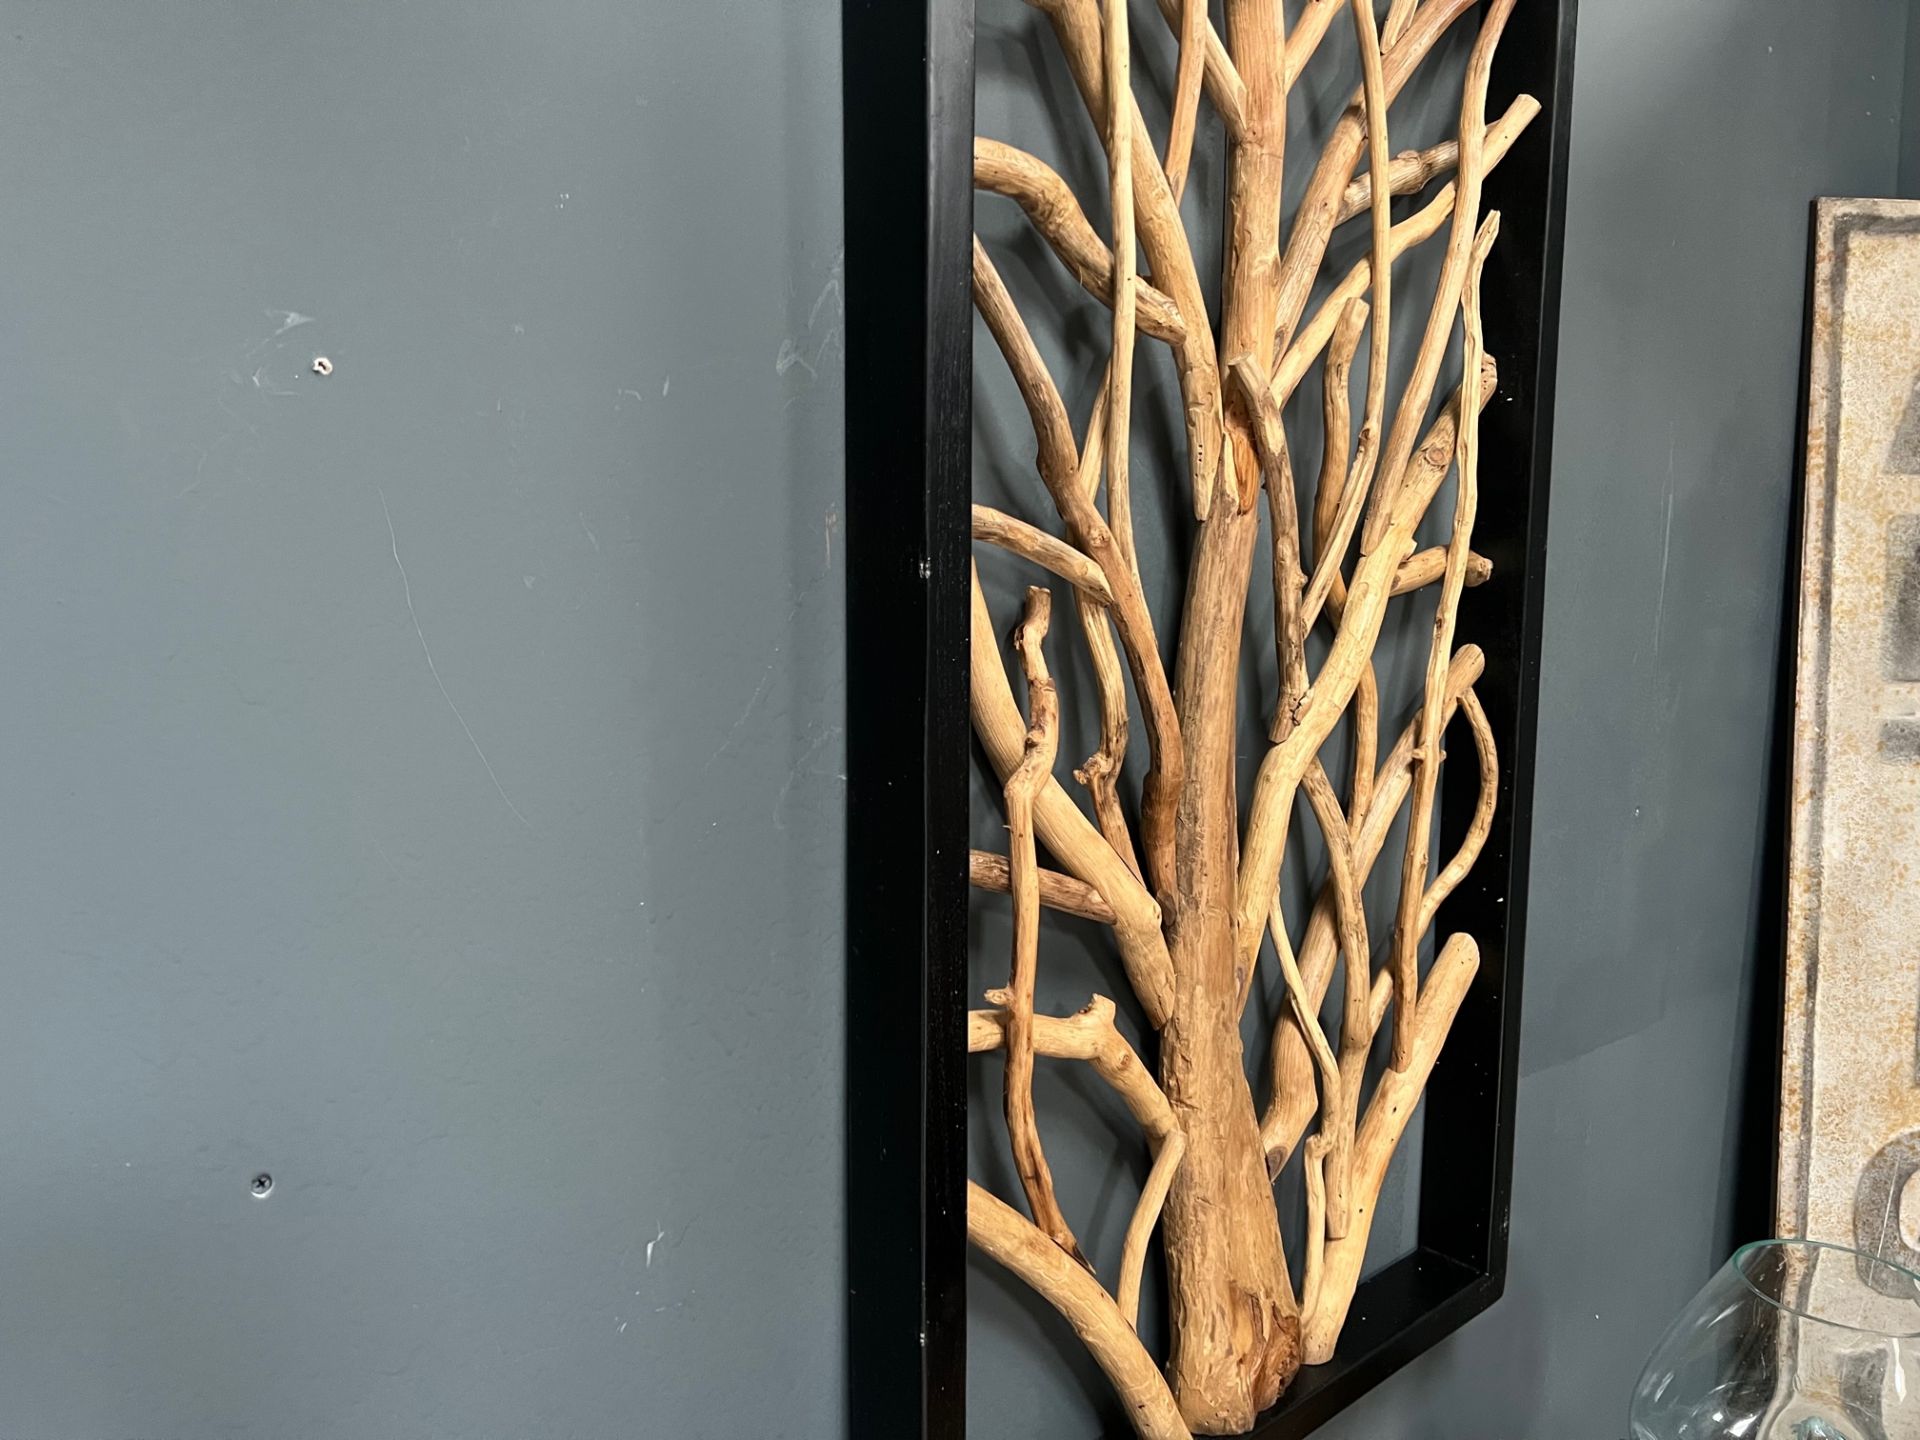 HUGE 120CM TALL TEAK ROOTWOOD RUSTIC WALL ART DECOR IN BLACK FRAME (PLEASE NOTE EVERY ONE IS - Image 3 of 3